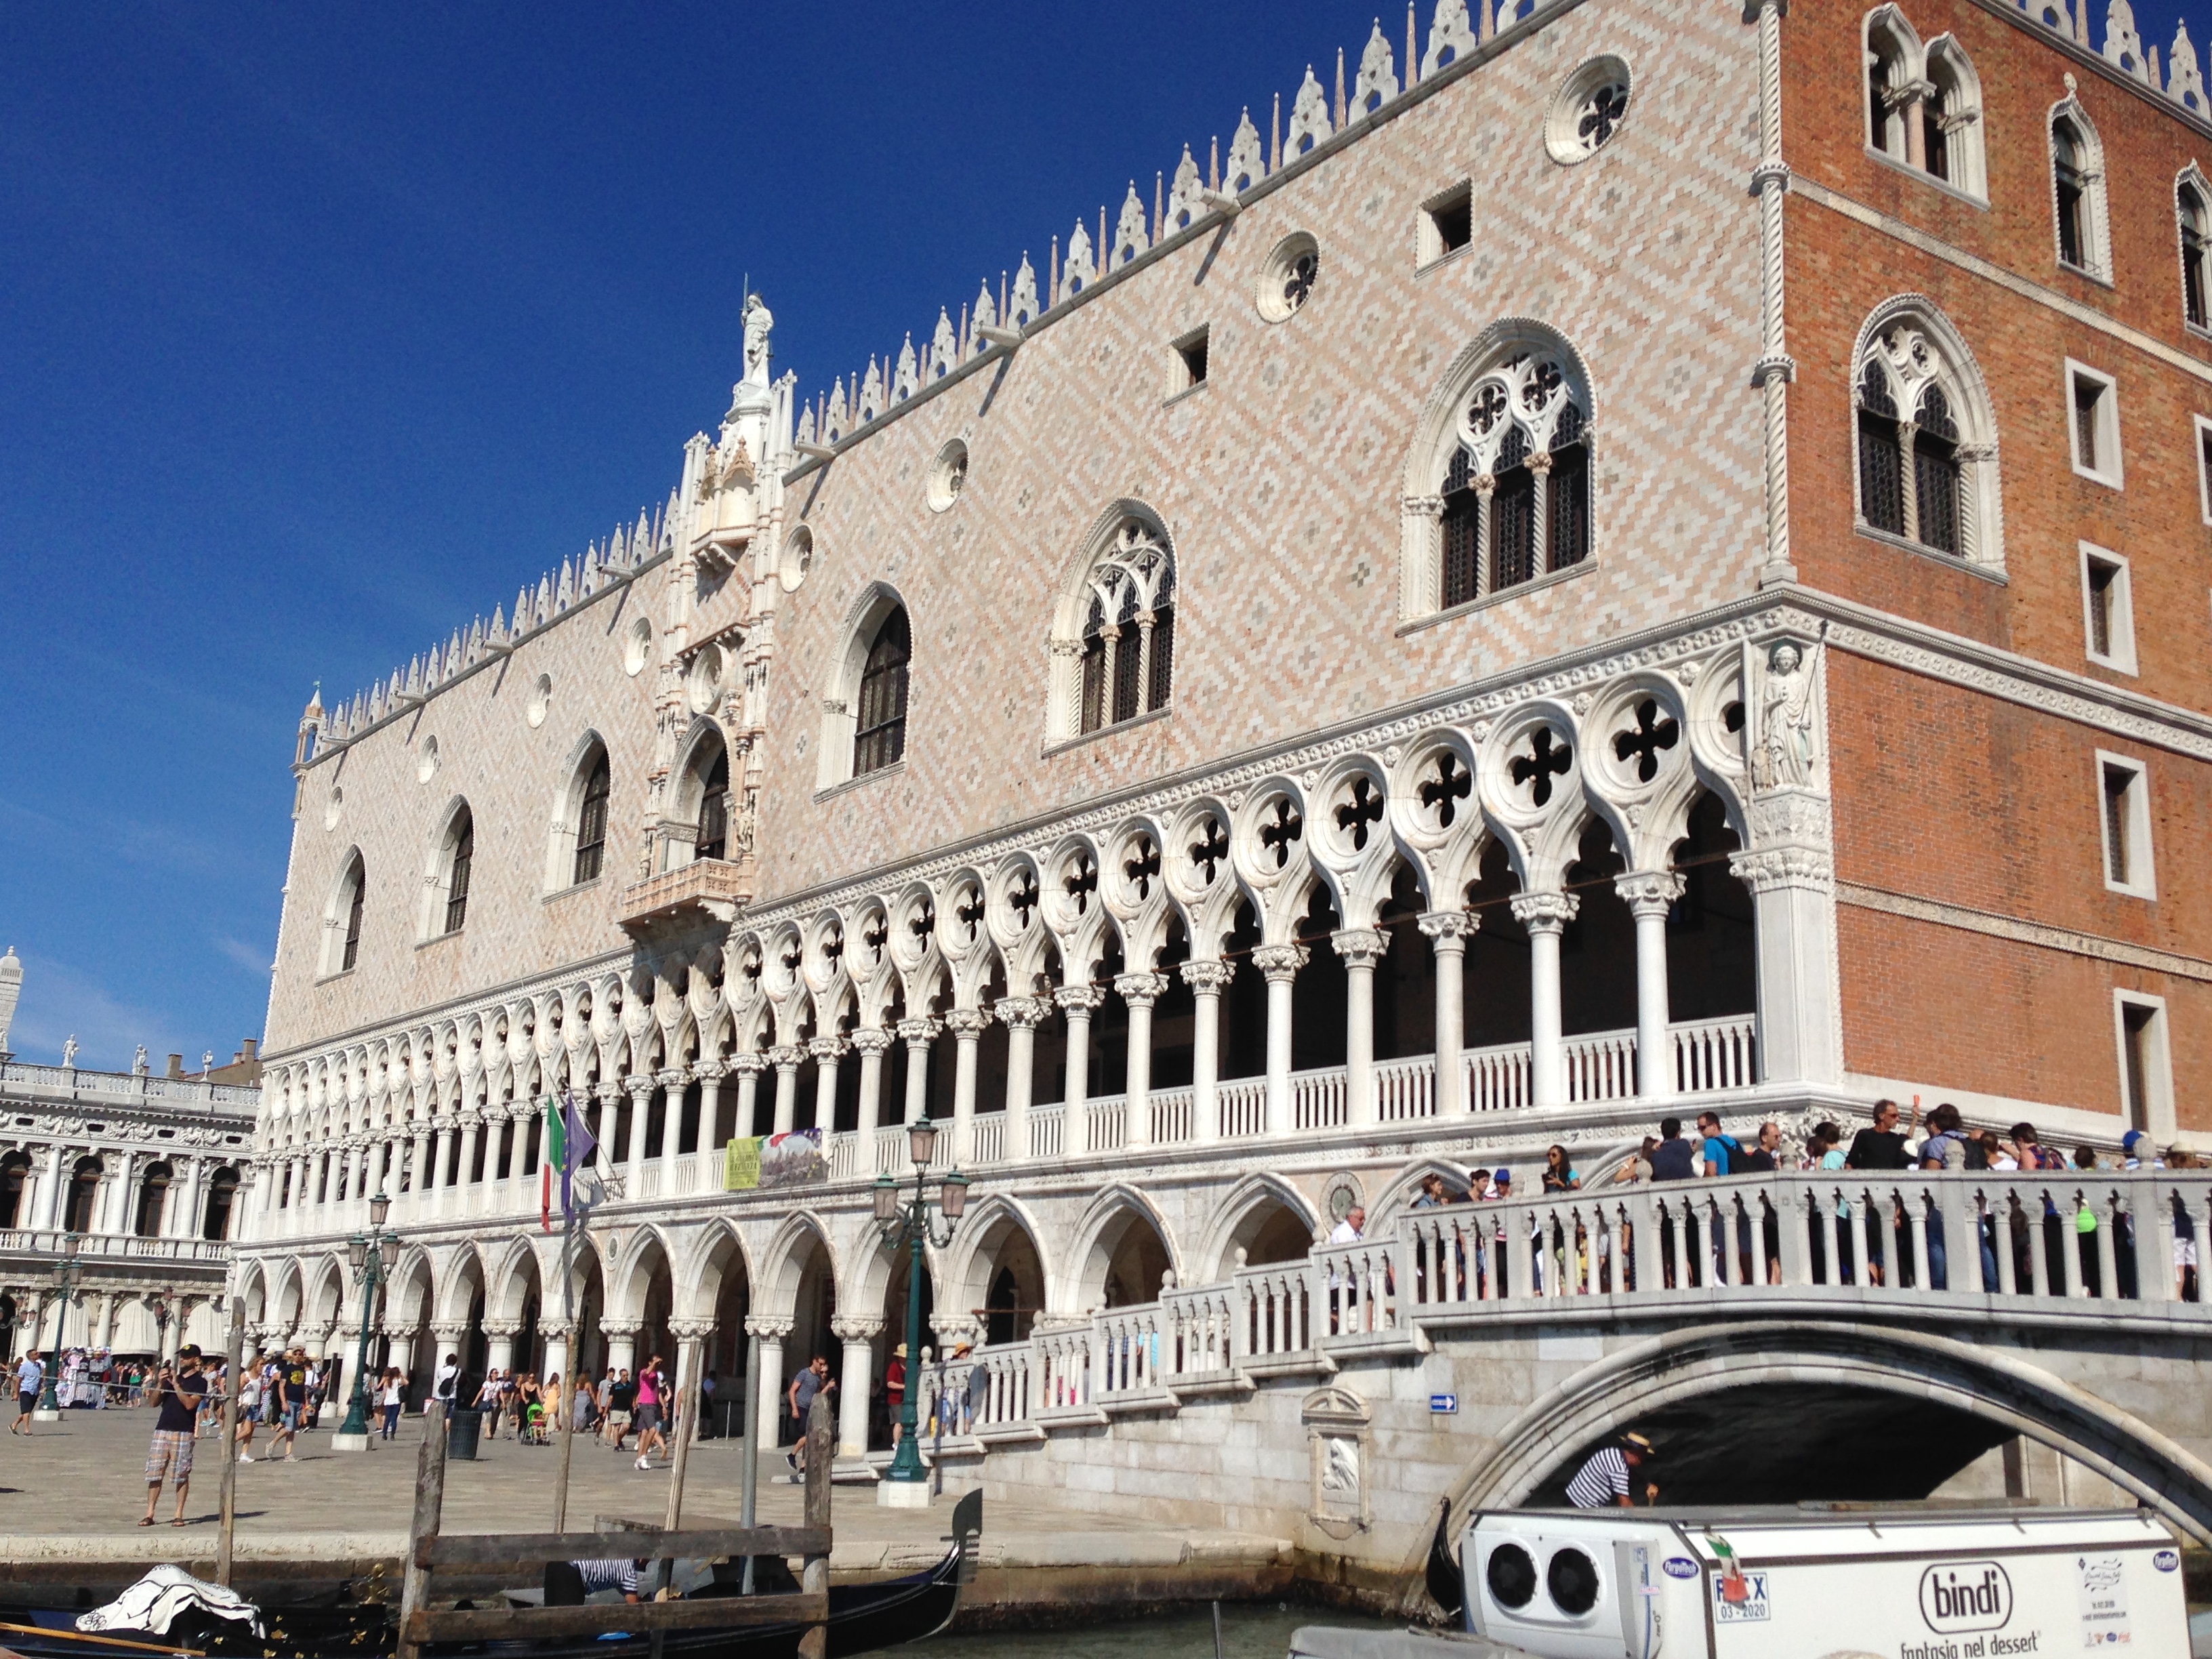 Ducal Palace in Venice